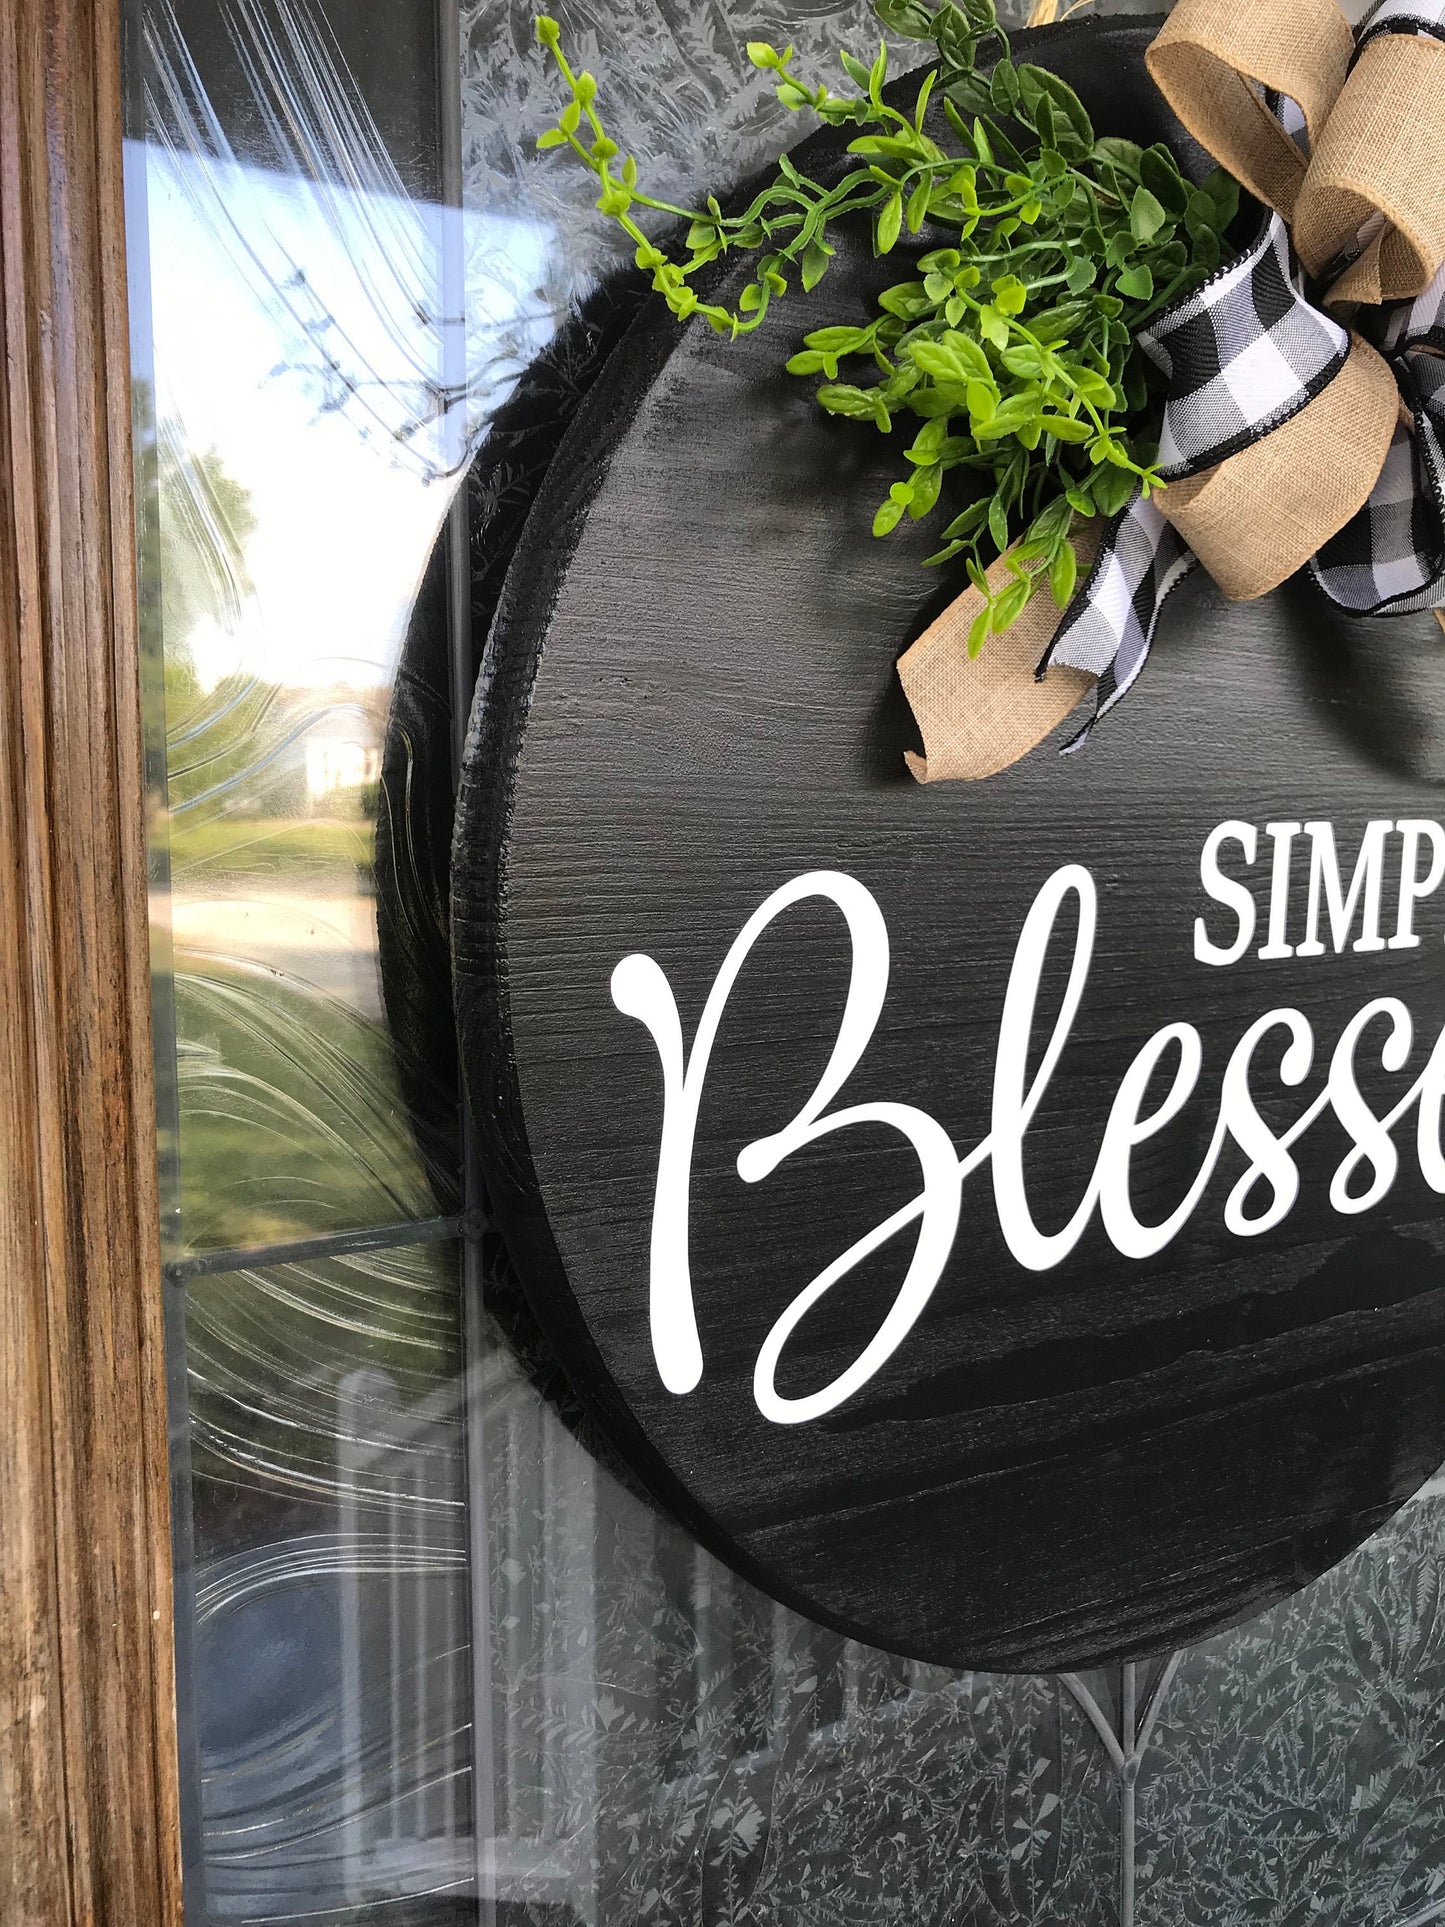 Simply Blessed Door Sign